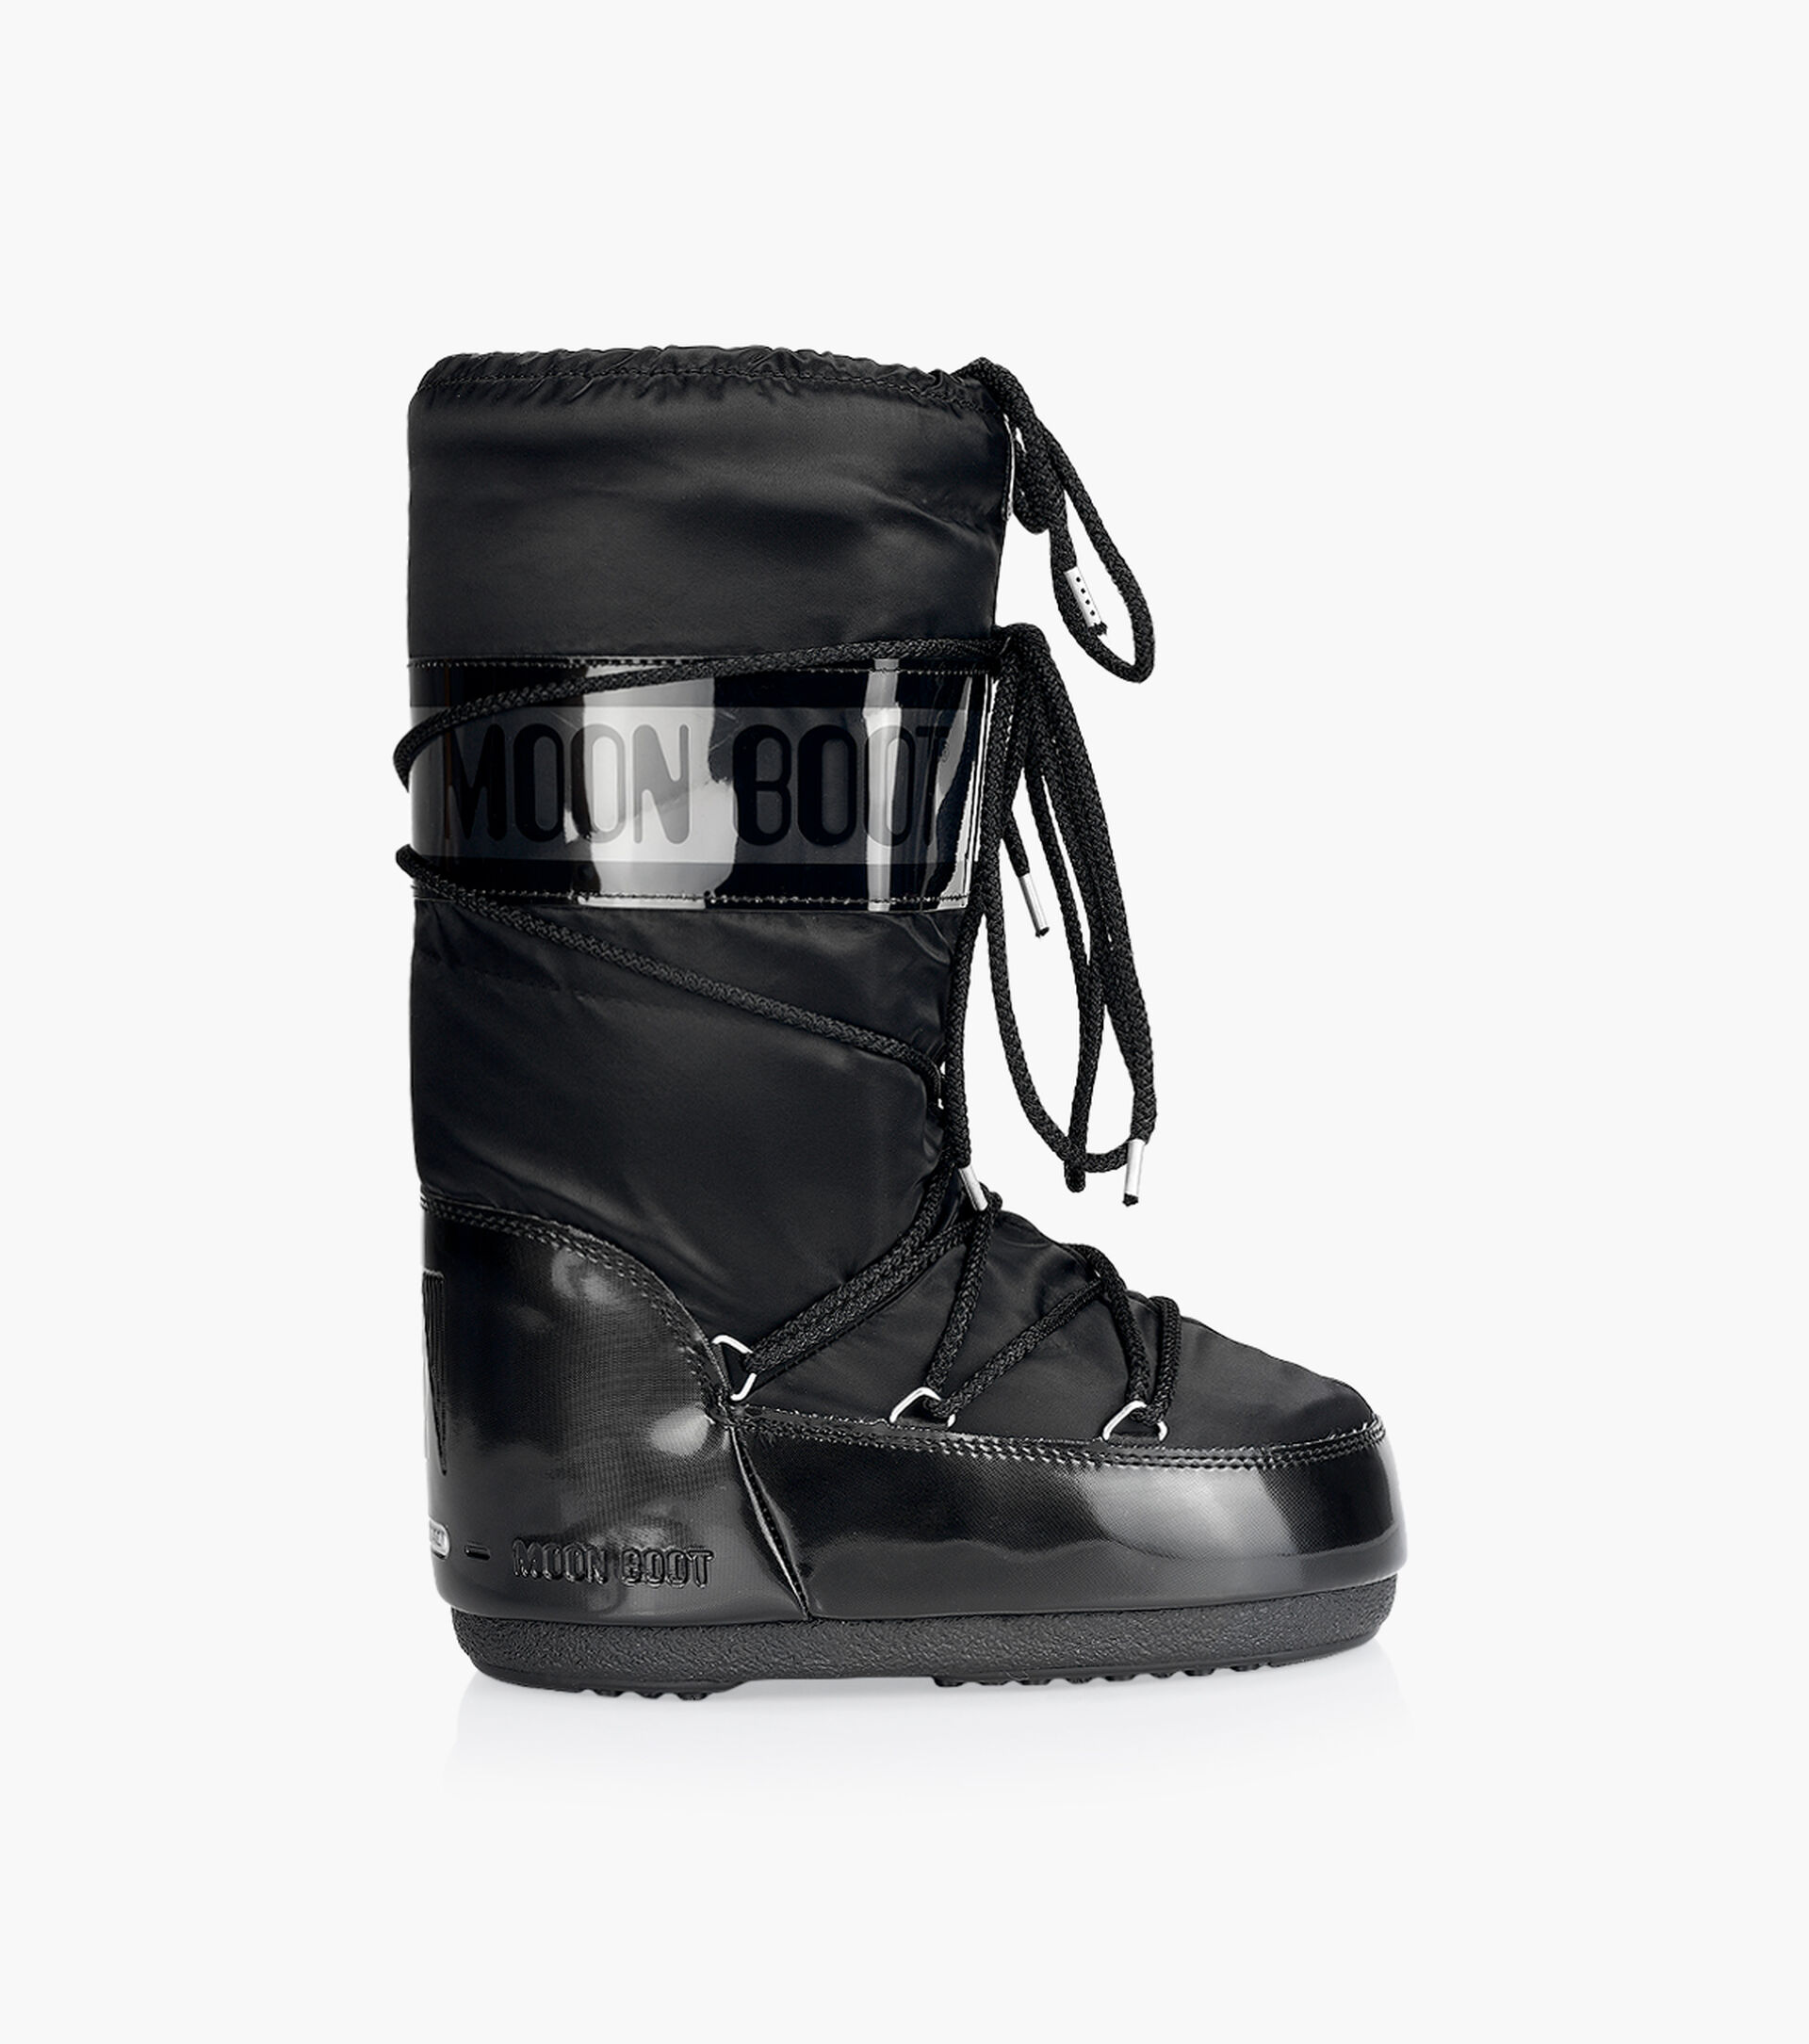 MOON BOOT ICON GLANCE BOOTS - Black Nylon | Browns Shoes